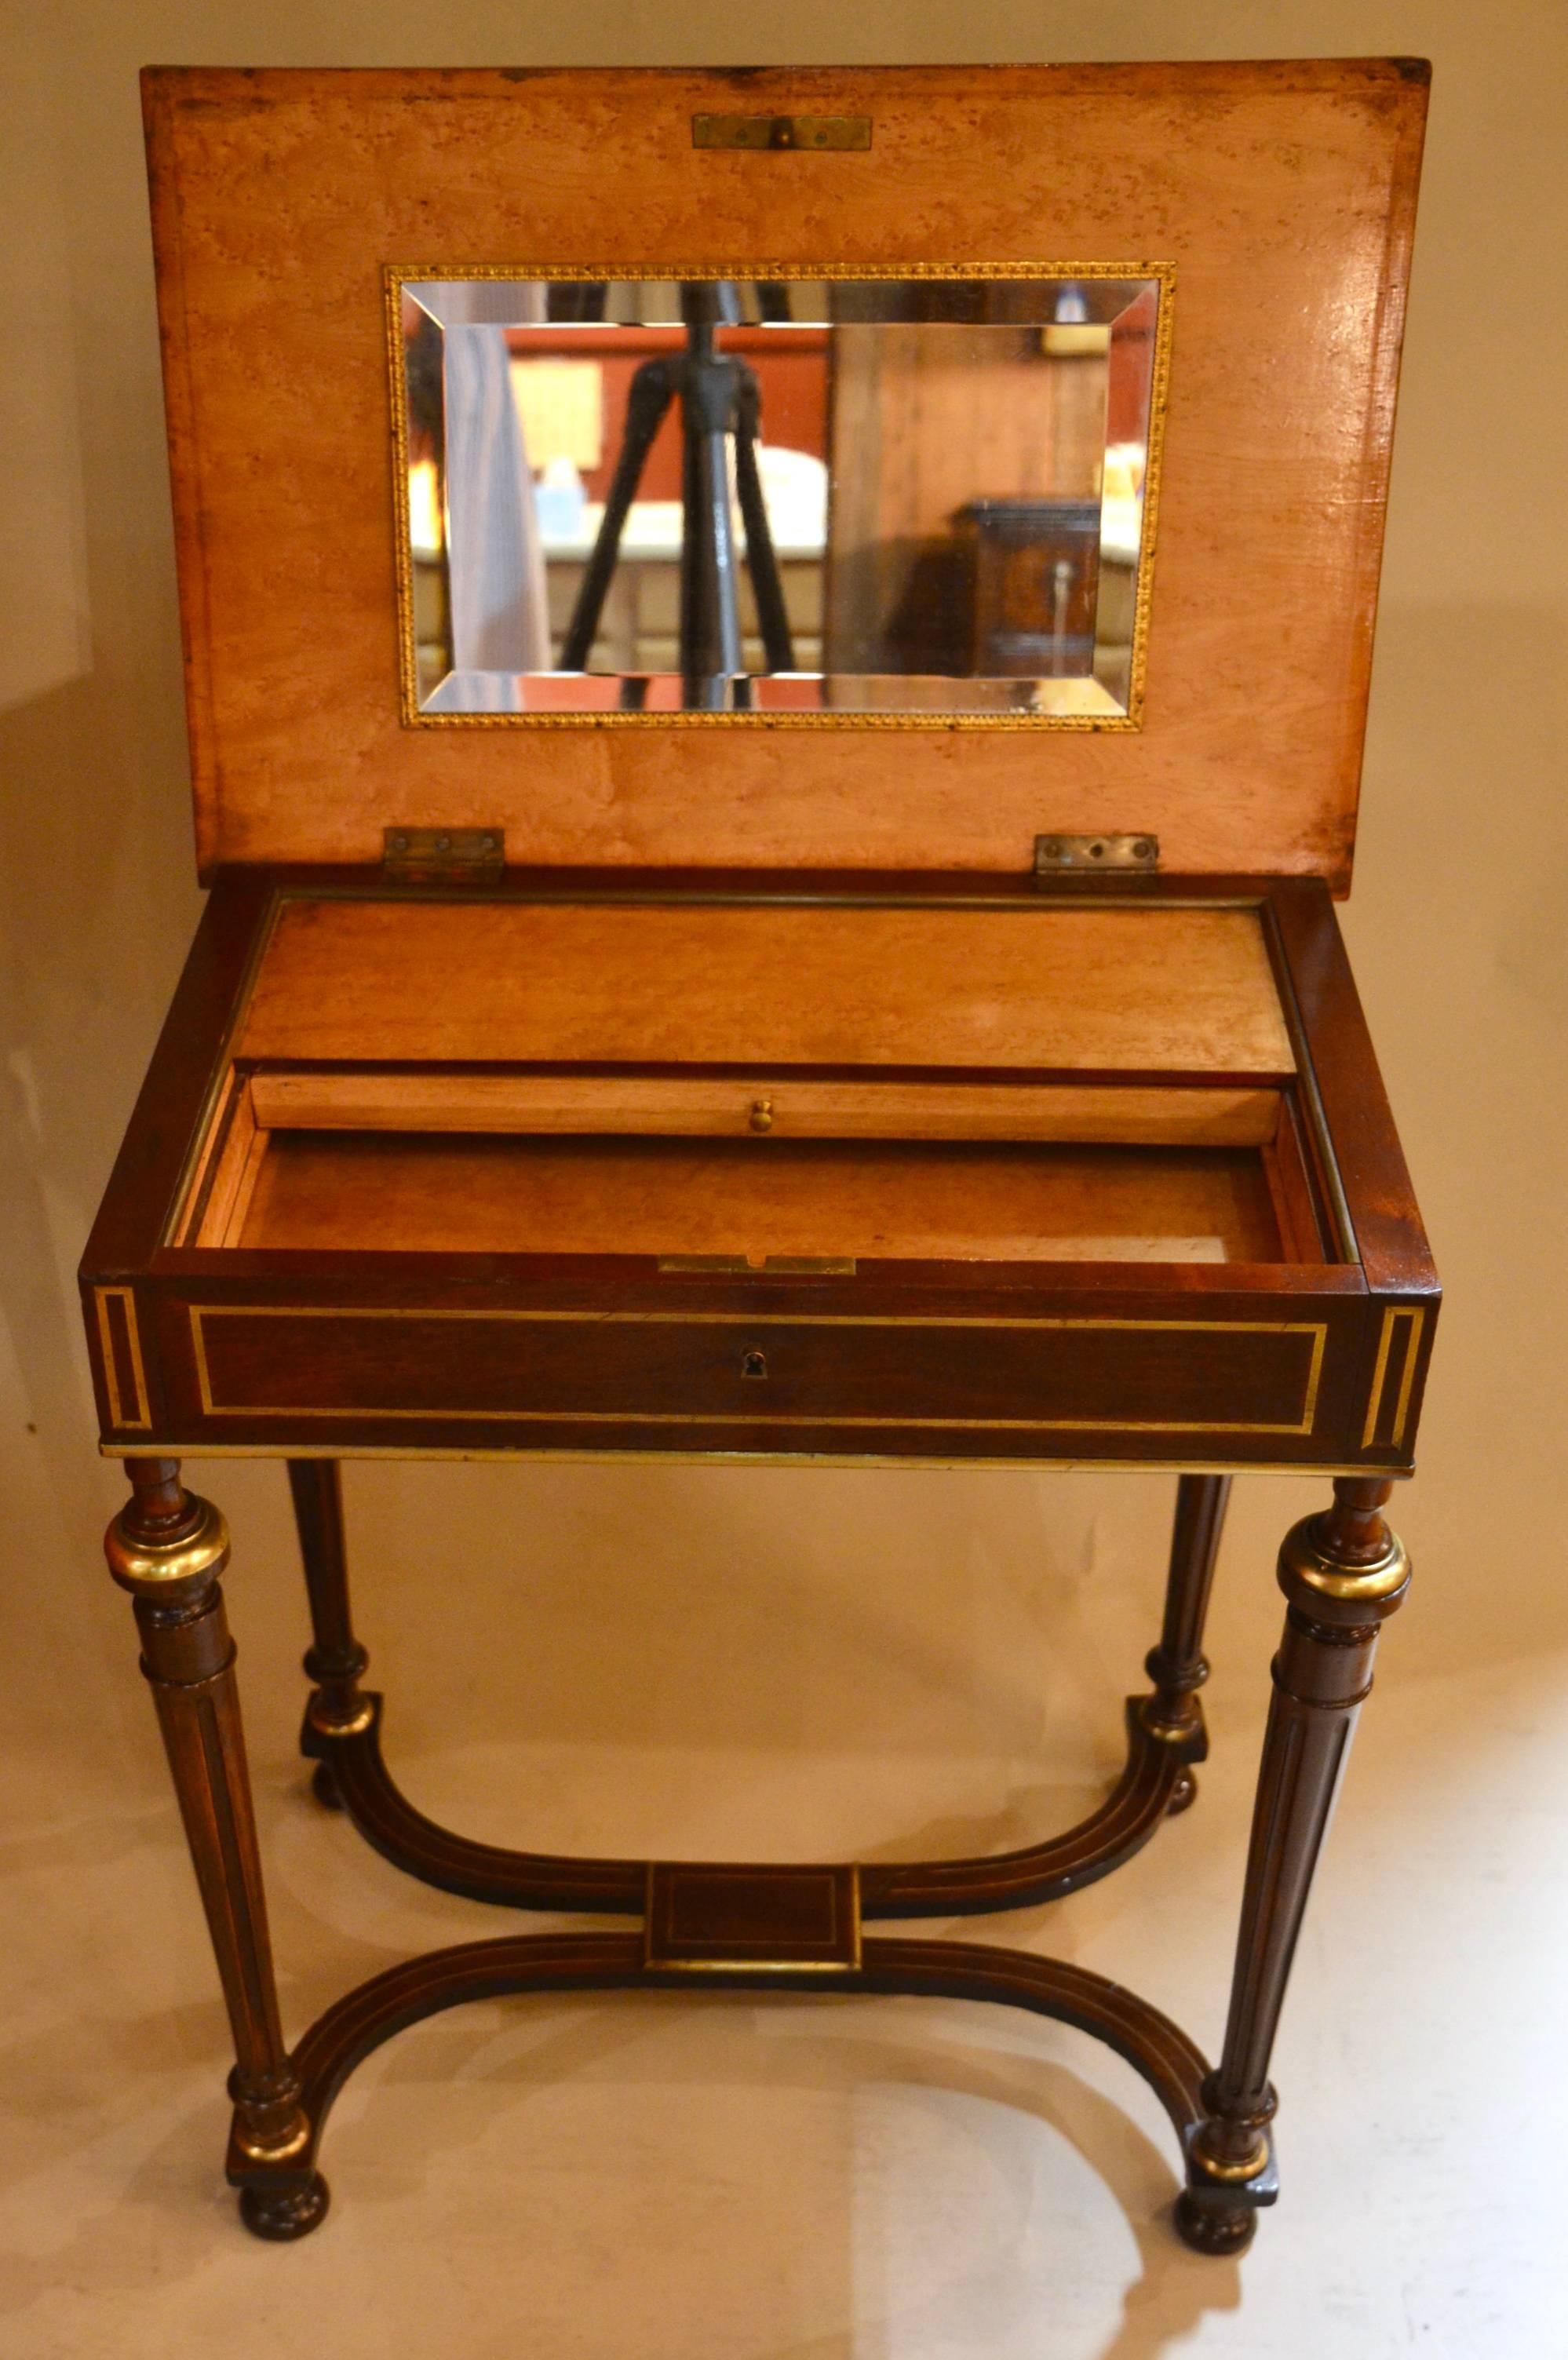 This dressing table has a mirror inside and is nicely decorated.